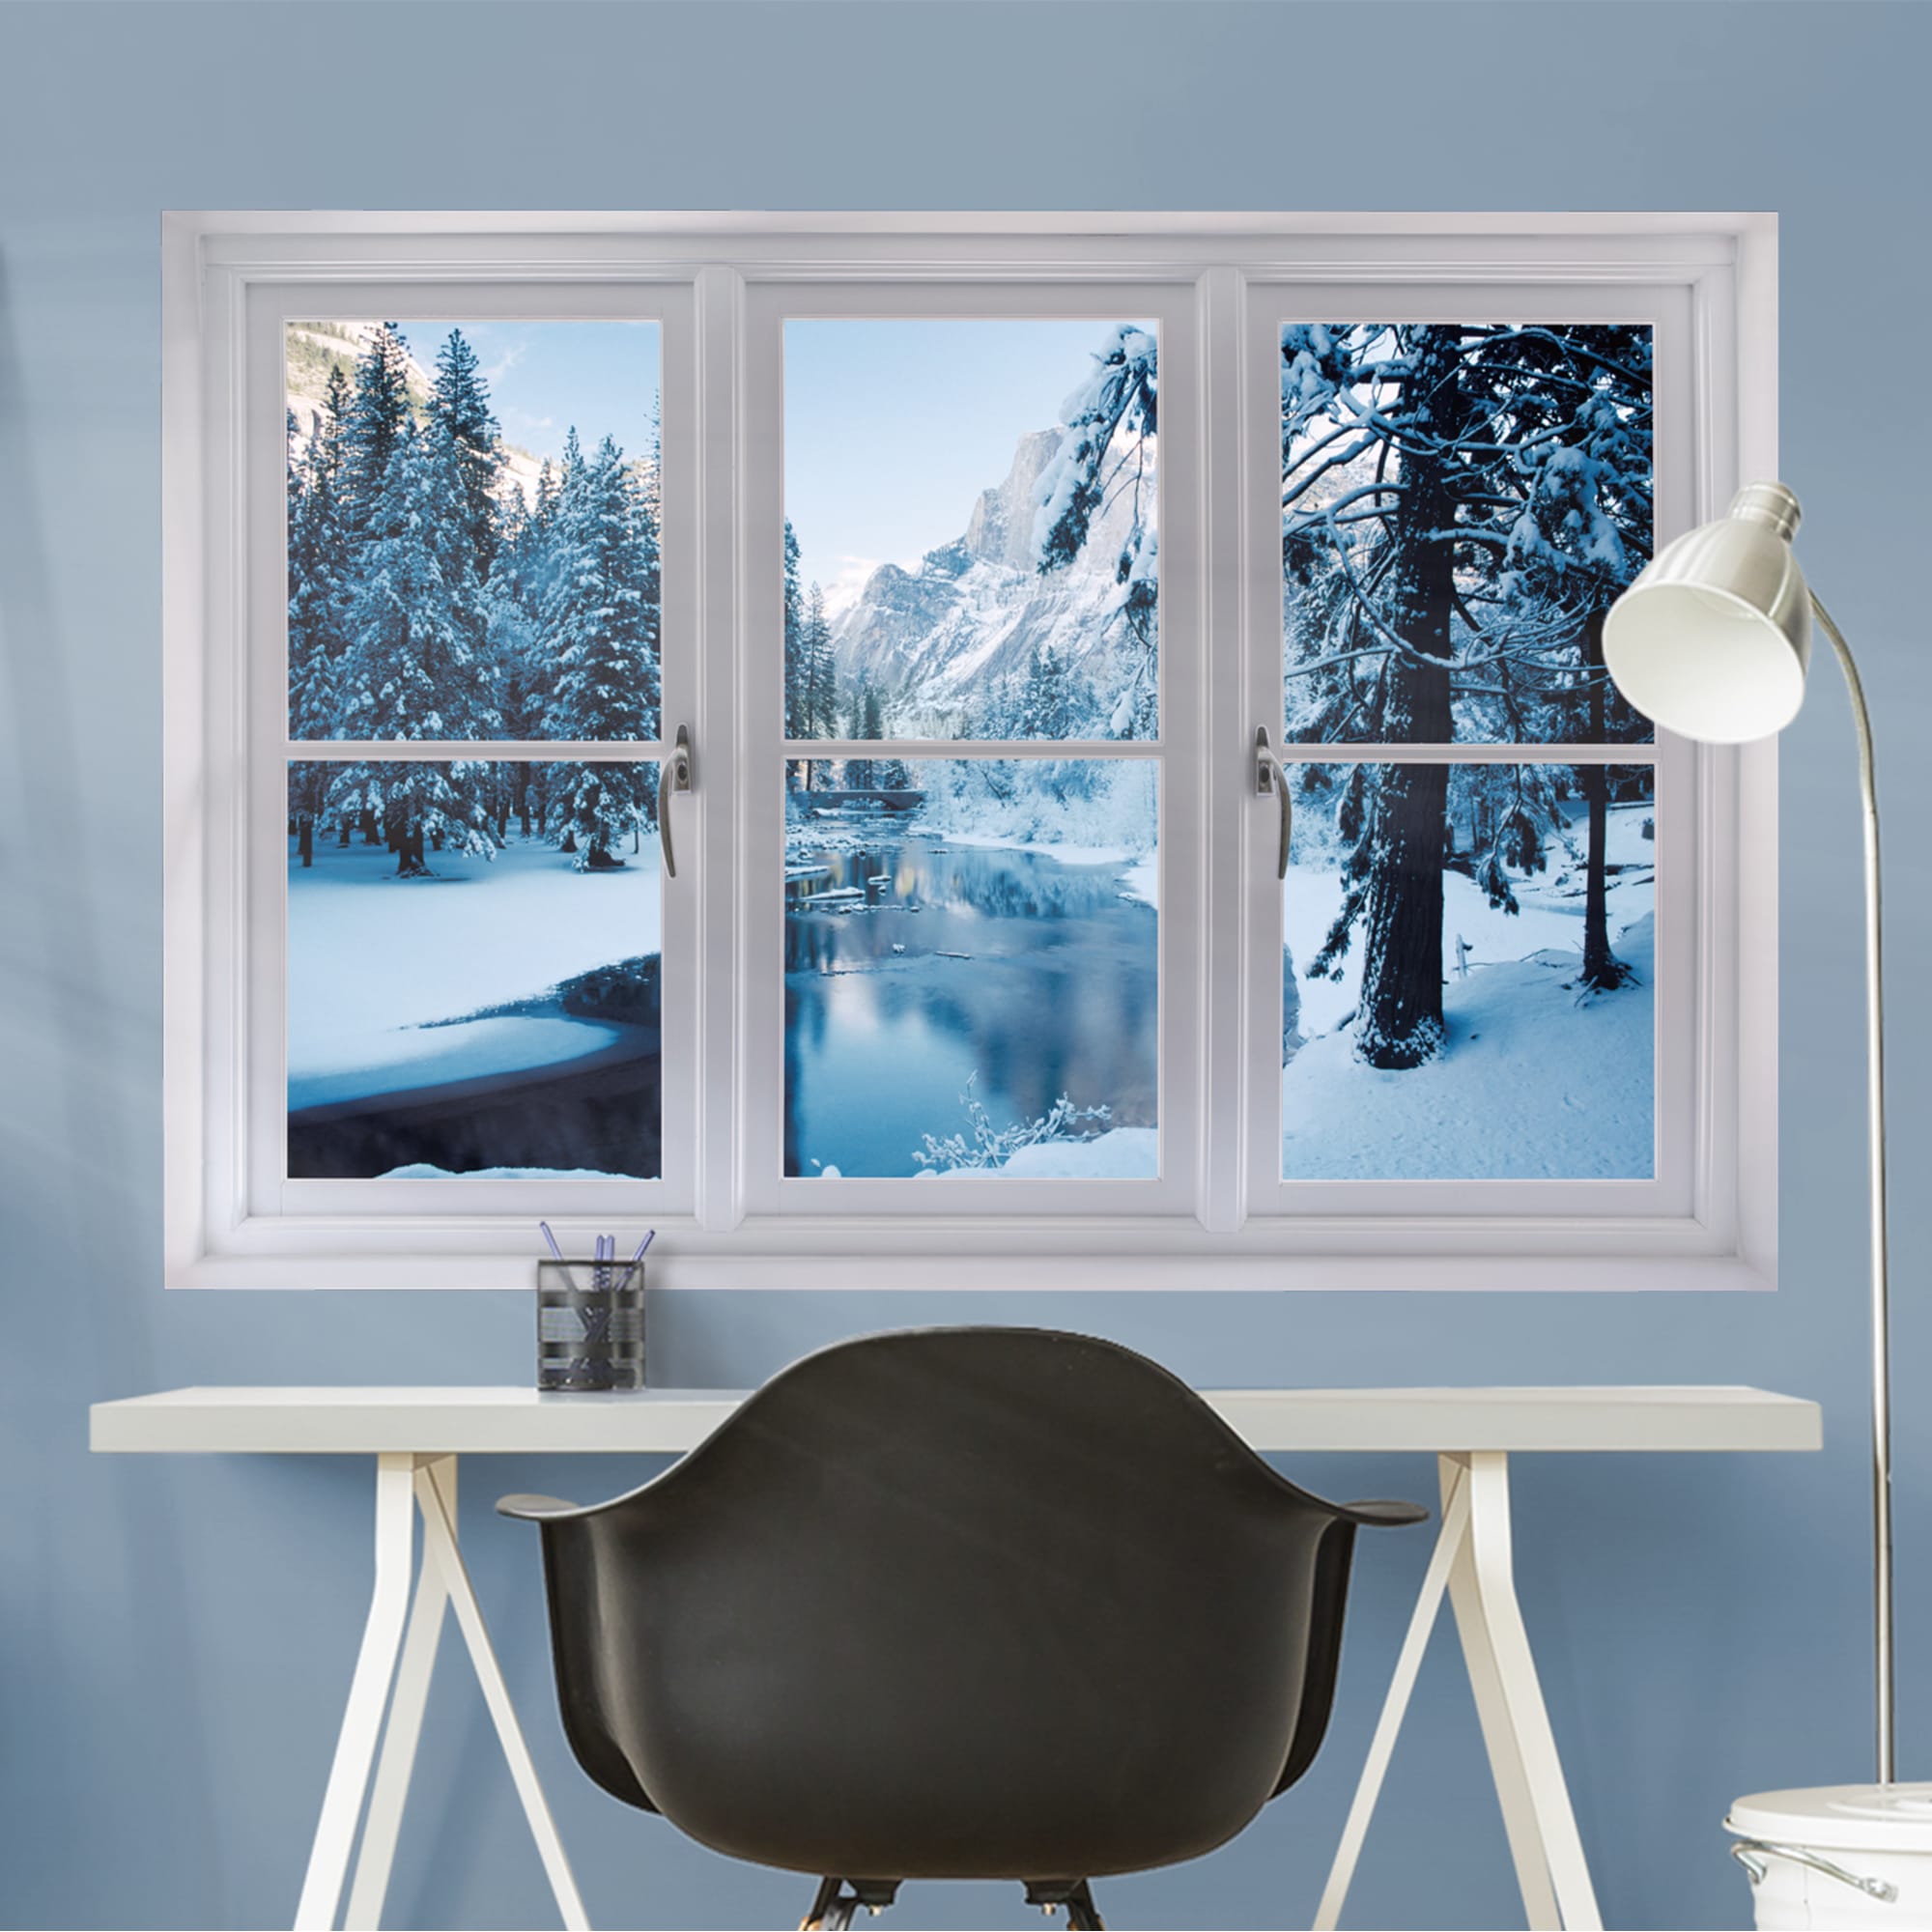 Instant Window: Merced River in Winter - Removable Wall Graphic 51.0"W x 34.0"H by Fathead | Vinyl